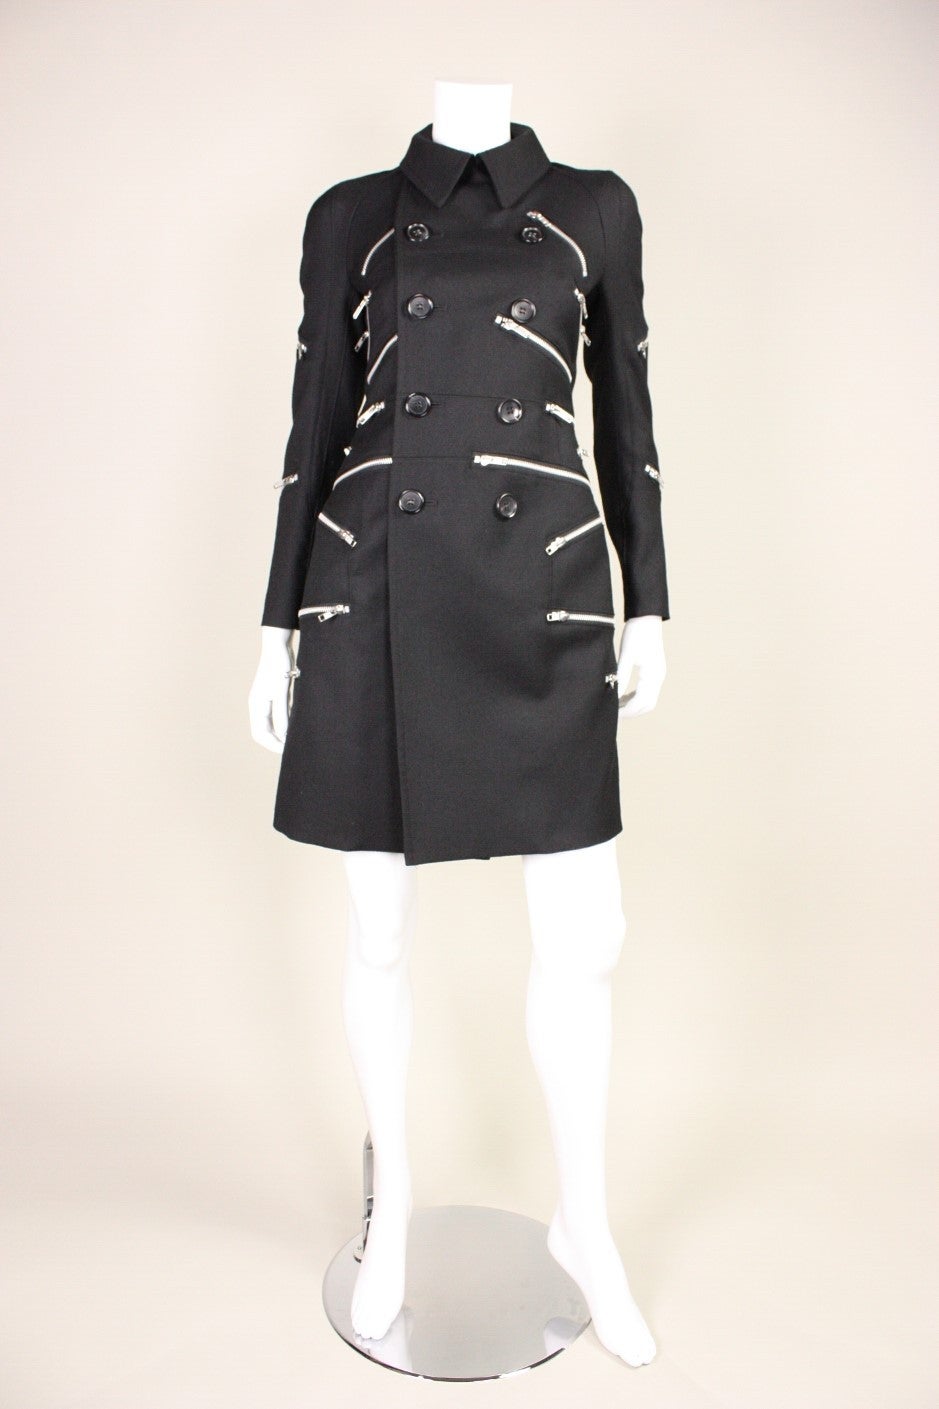 Contemporary coat from Comme des Garçons from the 2013 collection is made of black wool with silver-toned zippers.  Fitted throughout.  Fully lined.  Button closures.

Labeled size small.

Measurements - 

Bust: 32"
Waist: